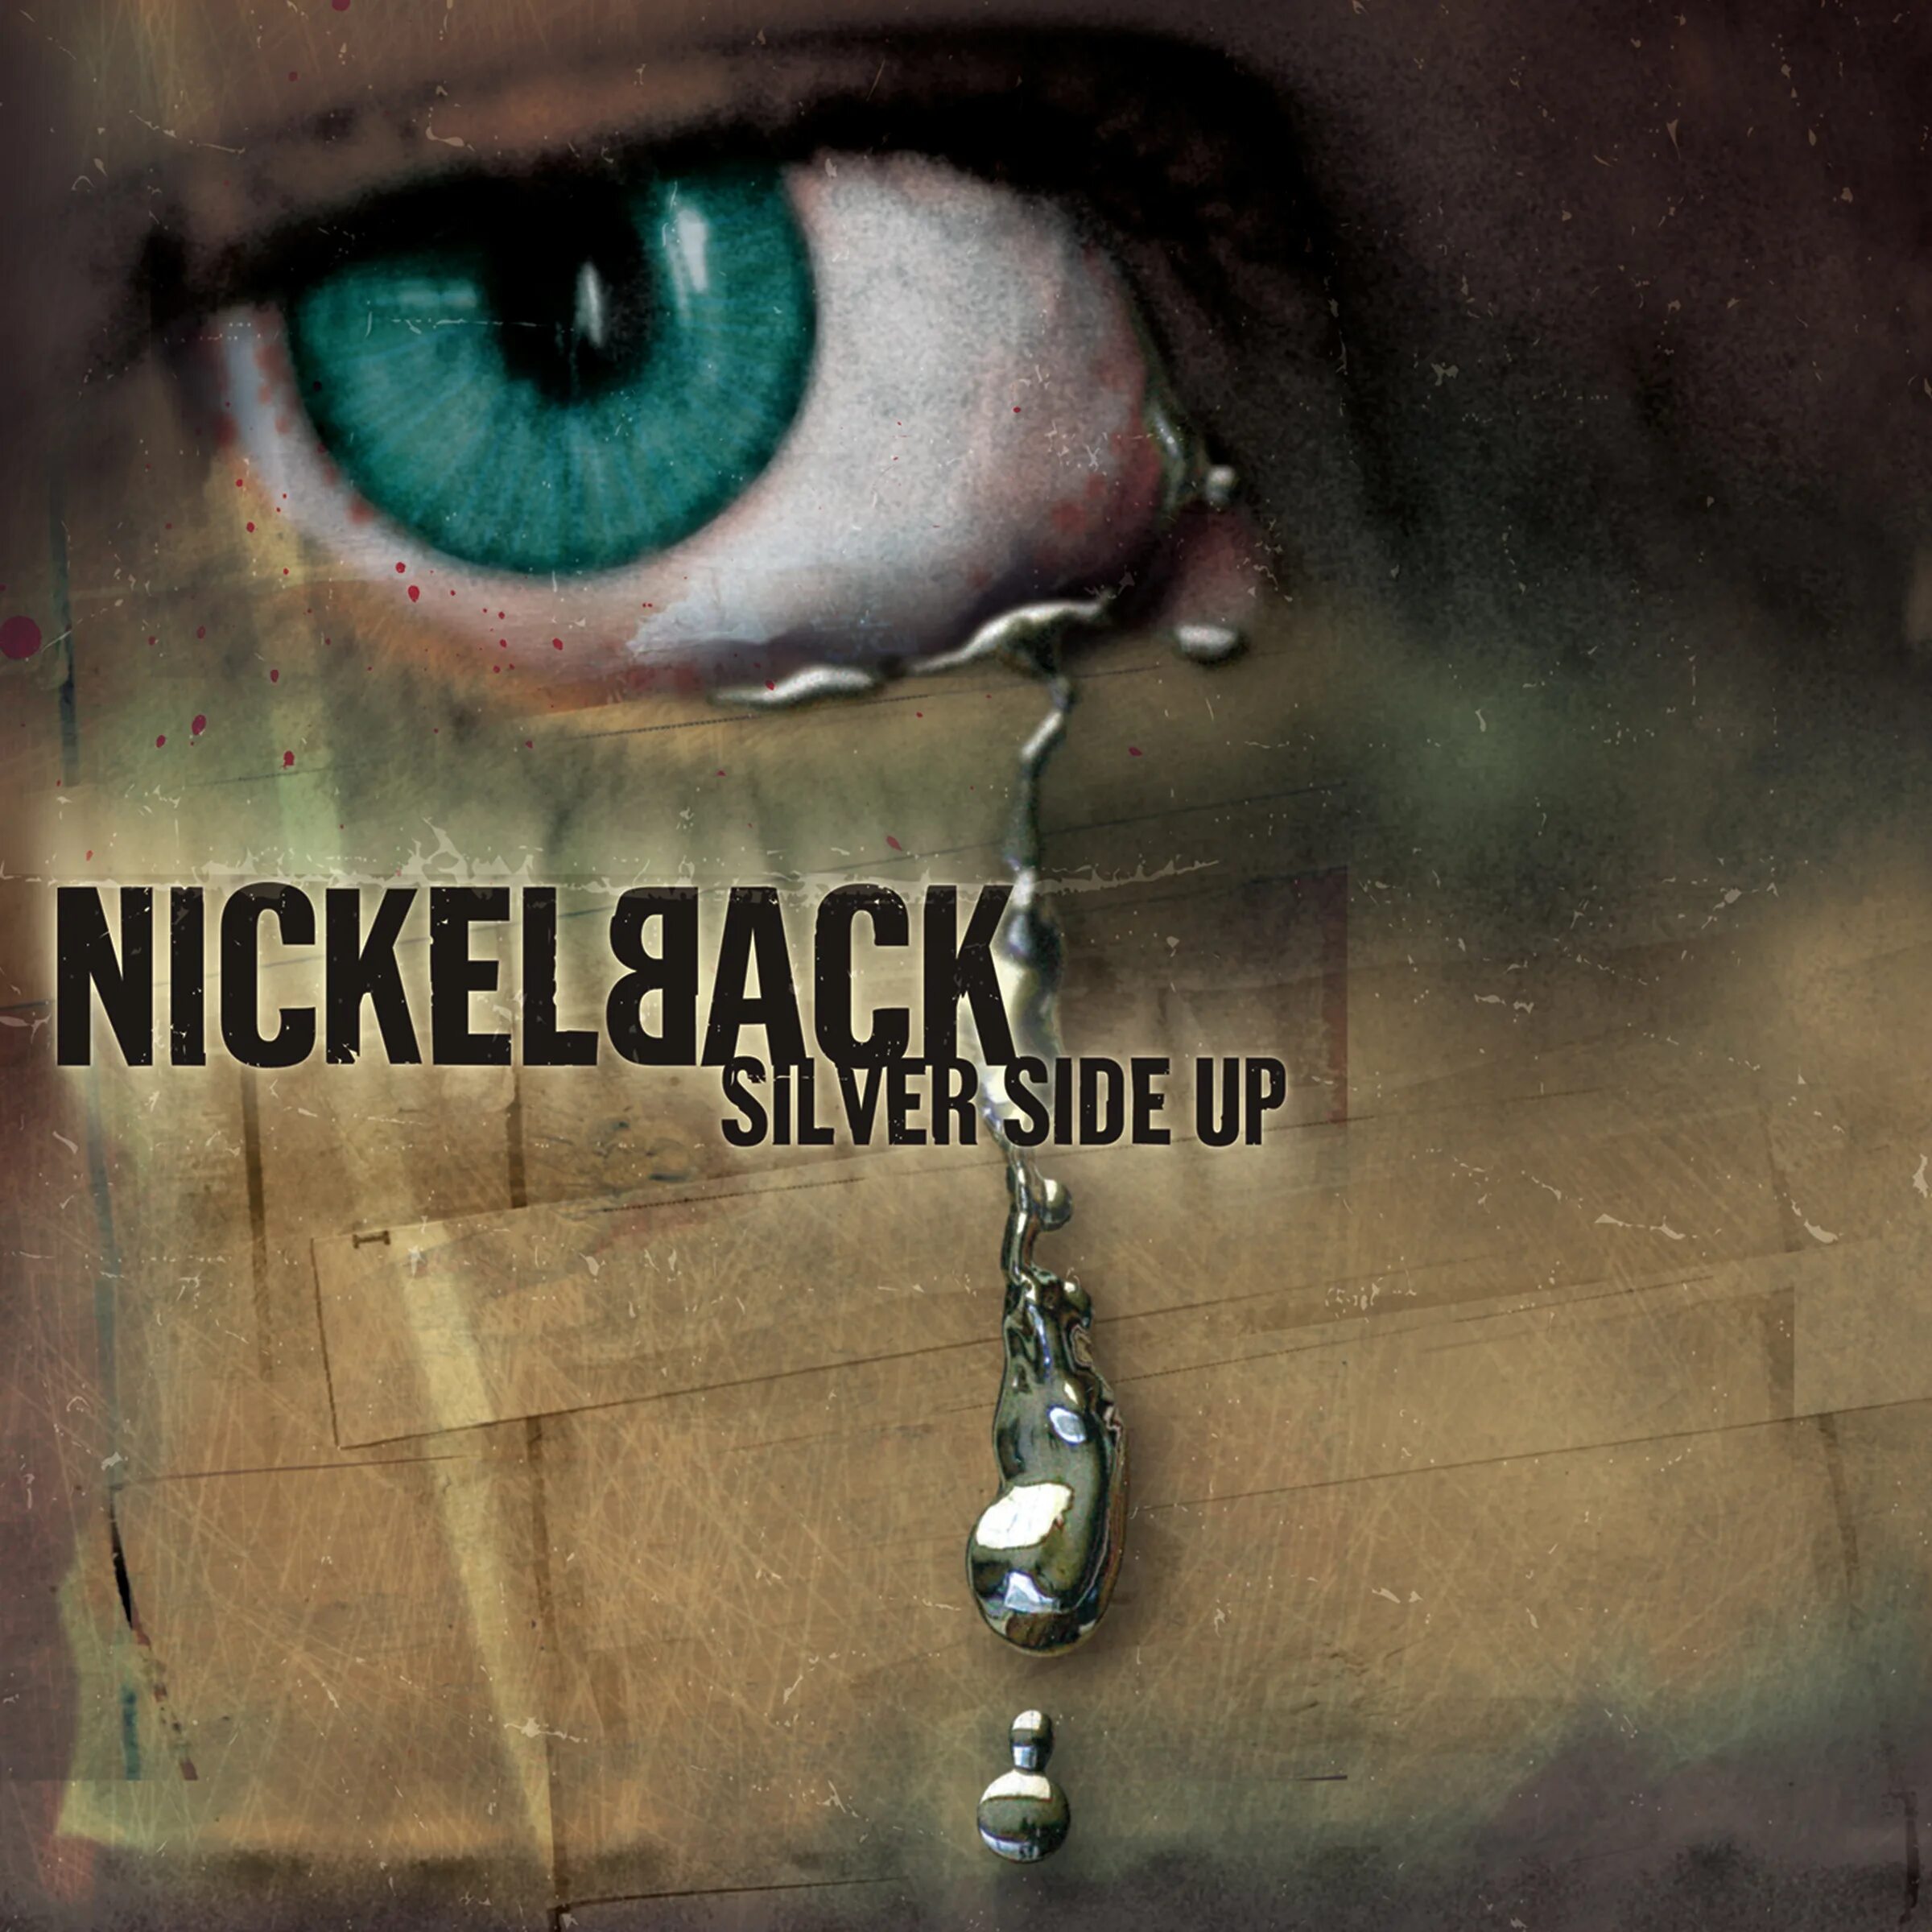 Nickelback "Silver Side up". 2001 - Silver Side up. Nickelback Silver Side up 2001. Nickelback Silver Side up обложка.